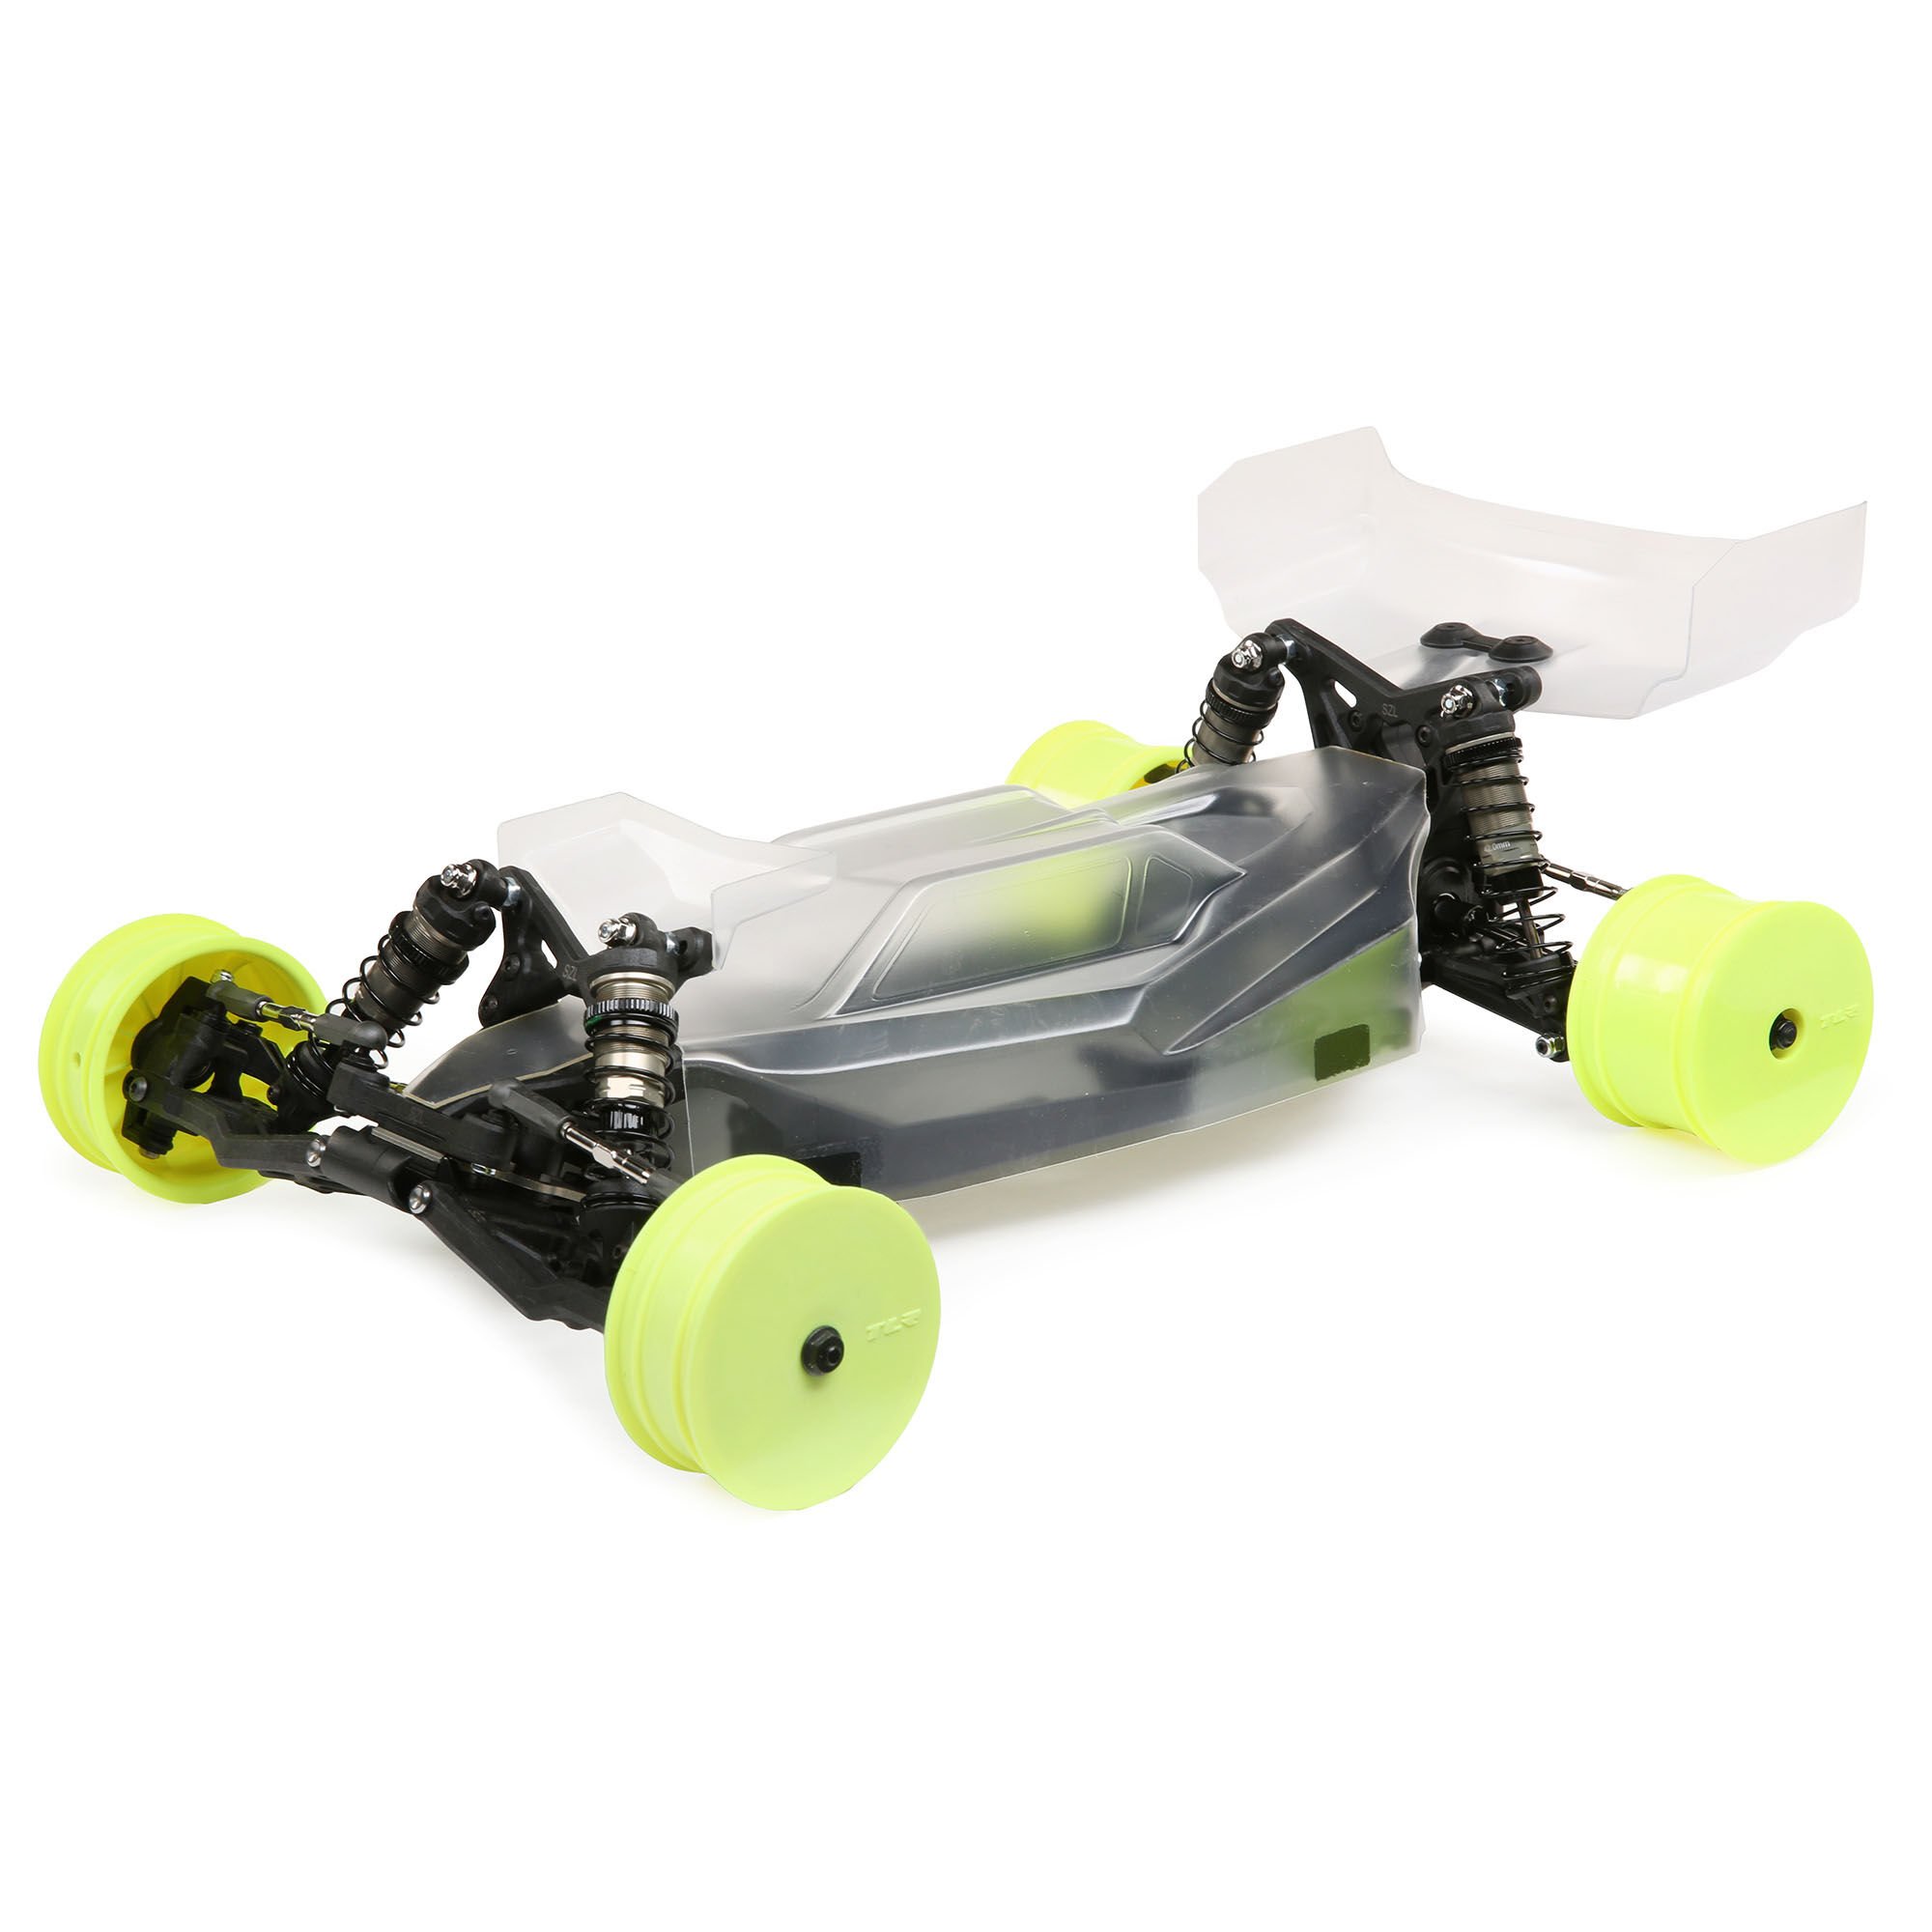 TLR 22 5.0 DC Race Roller RC Buggy